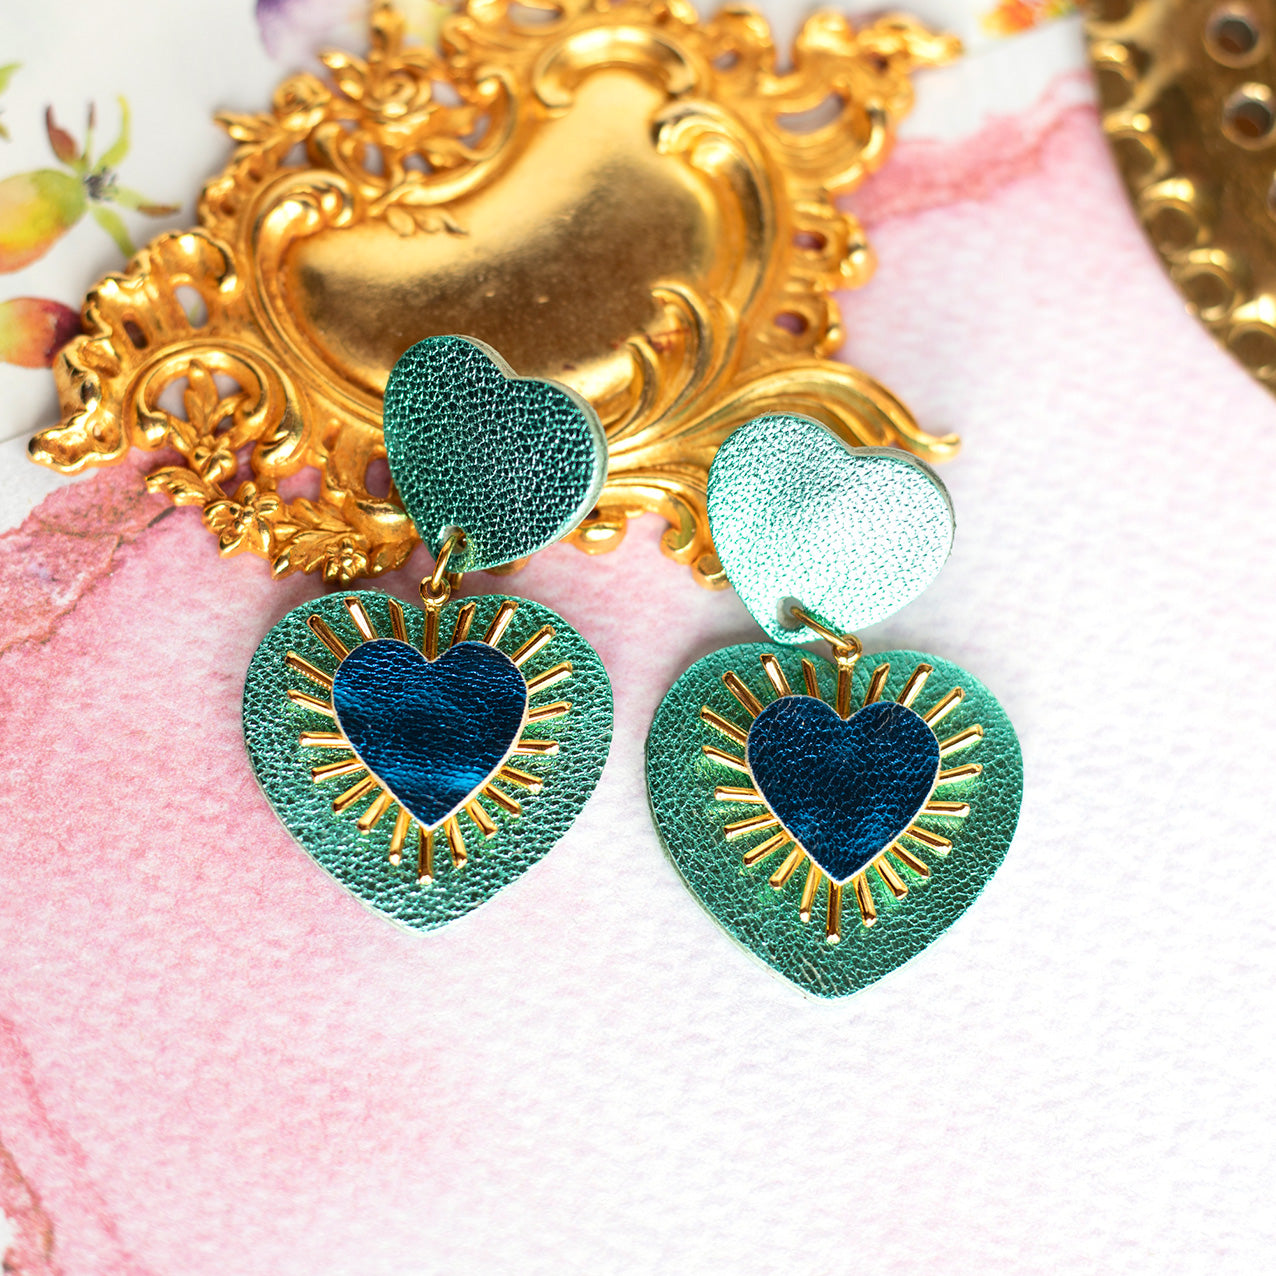 Sacré Coeur earrings in metallic turquoise and royal blue leather